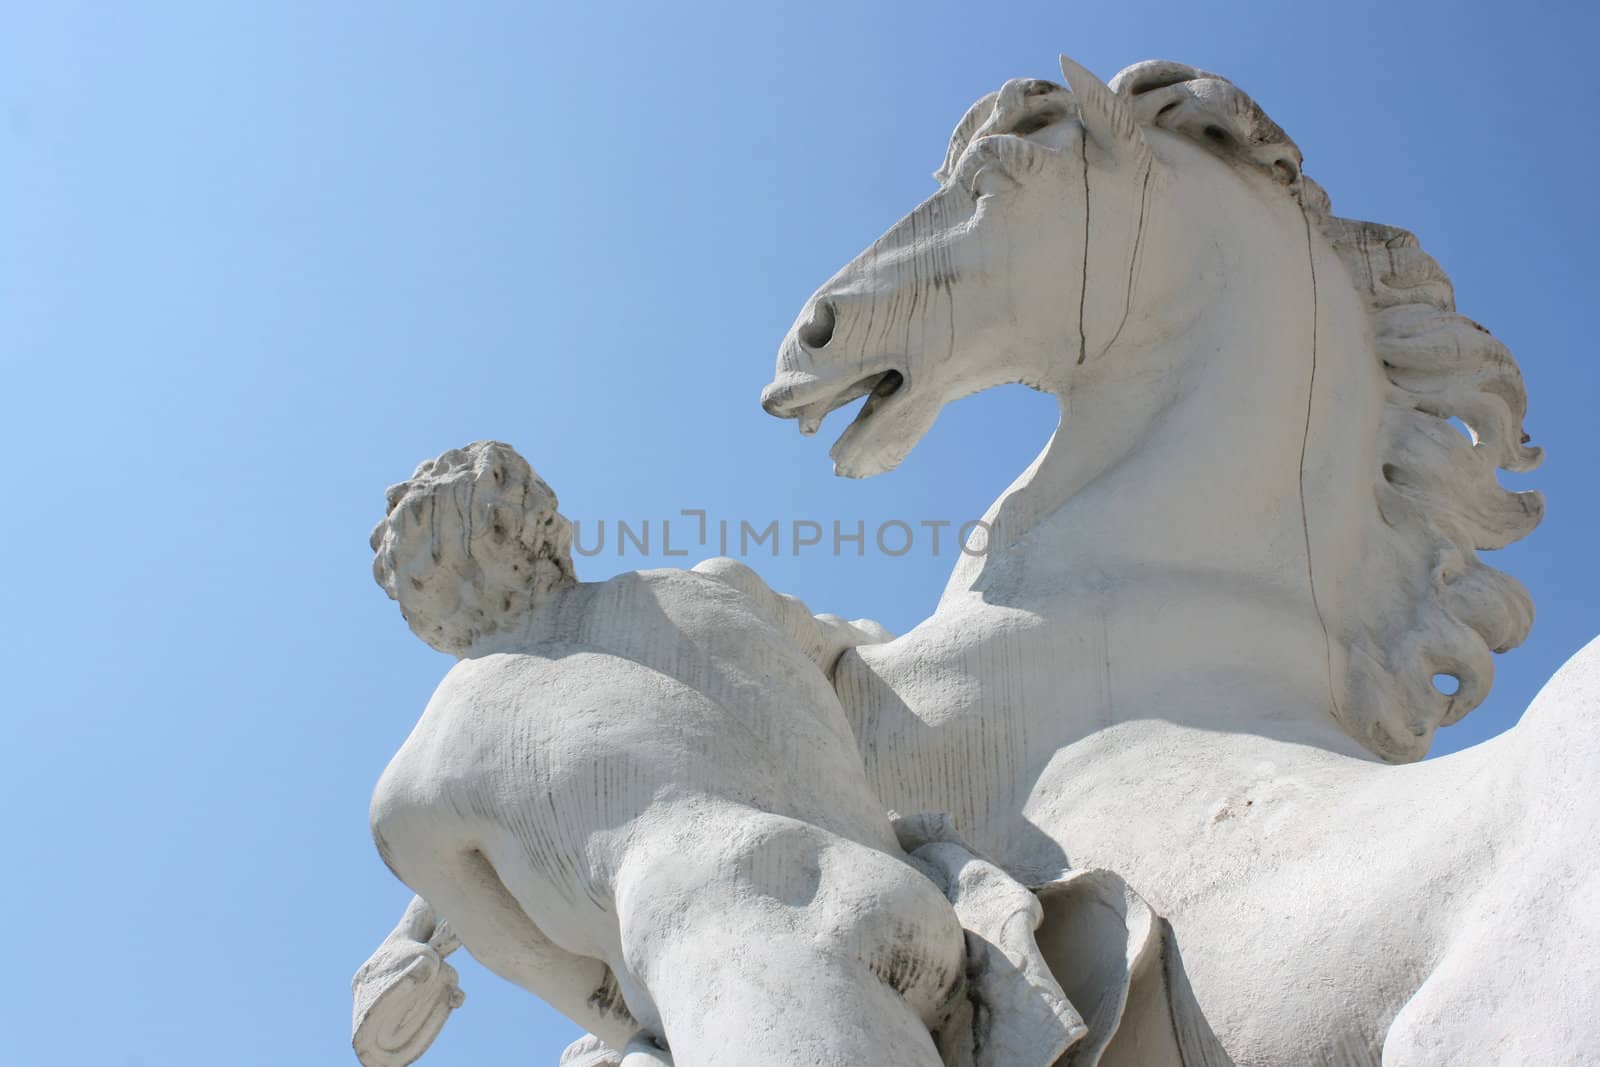 Detail of monument of horse and man. Sculpture is placed in front of Belvedere castle, Vienna, Austria